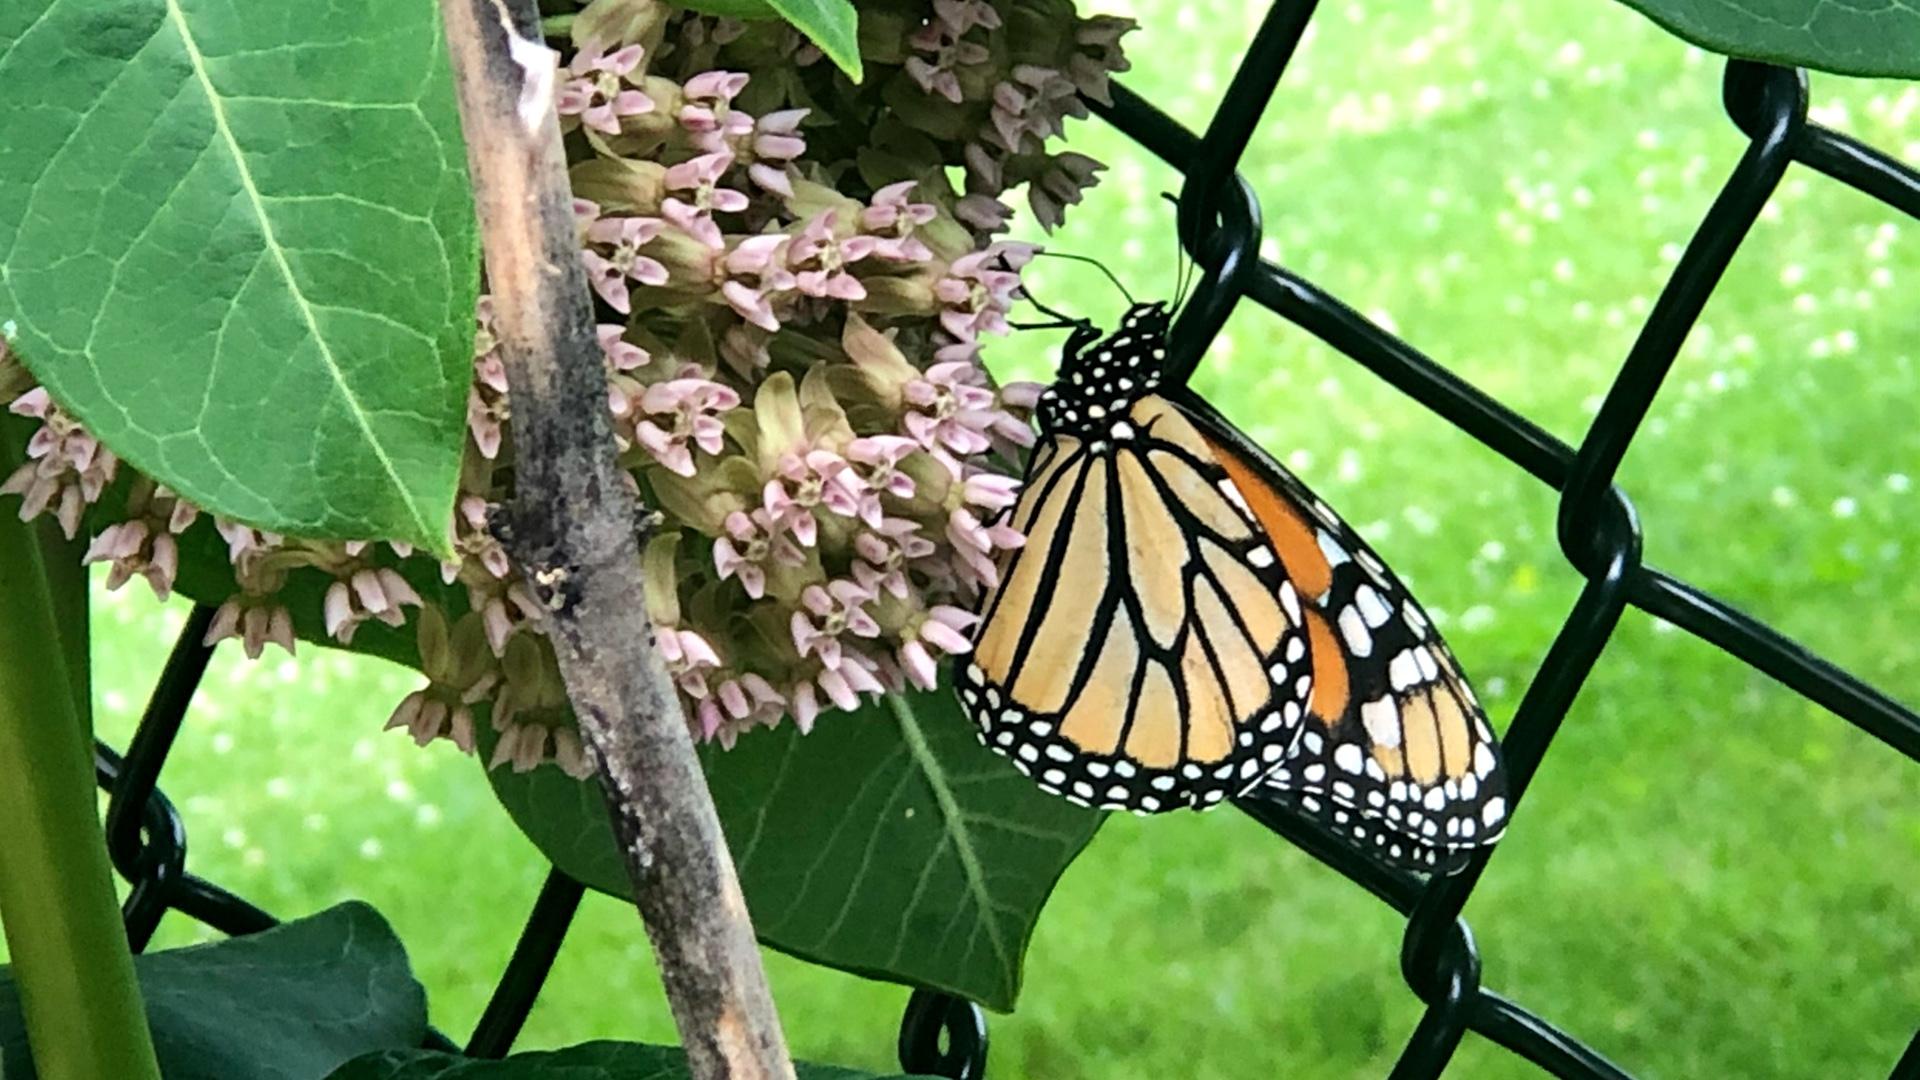 Monarch butterflies have started their 2,000-mile migration south to Mexico. (Patty Wetli / WTTW News)